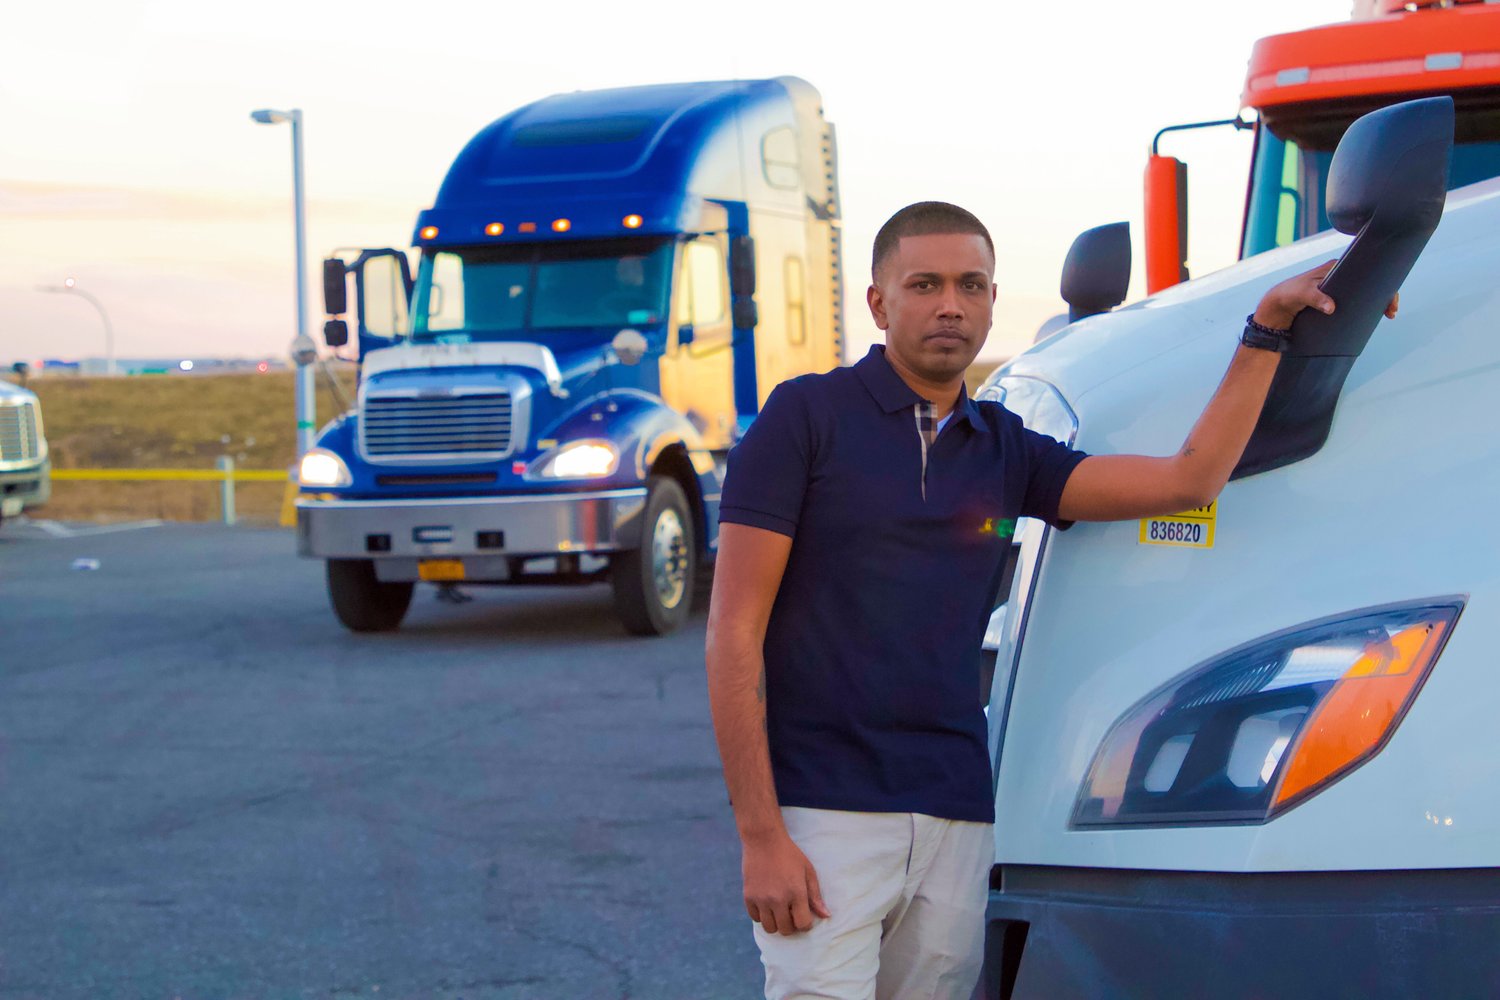 Freeporter and Guyana native Ken Deocharran, 37, started his trucking and courier service business in 2006, and through his contracts with Amazon, has since built a $15 million company, with roughly 120 trucks delivering goods throughout the tristate area and in Chattanooga, Tenn.